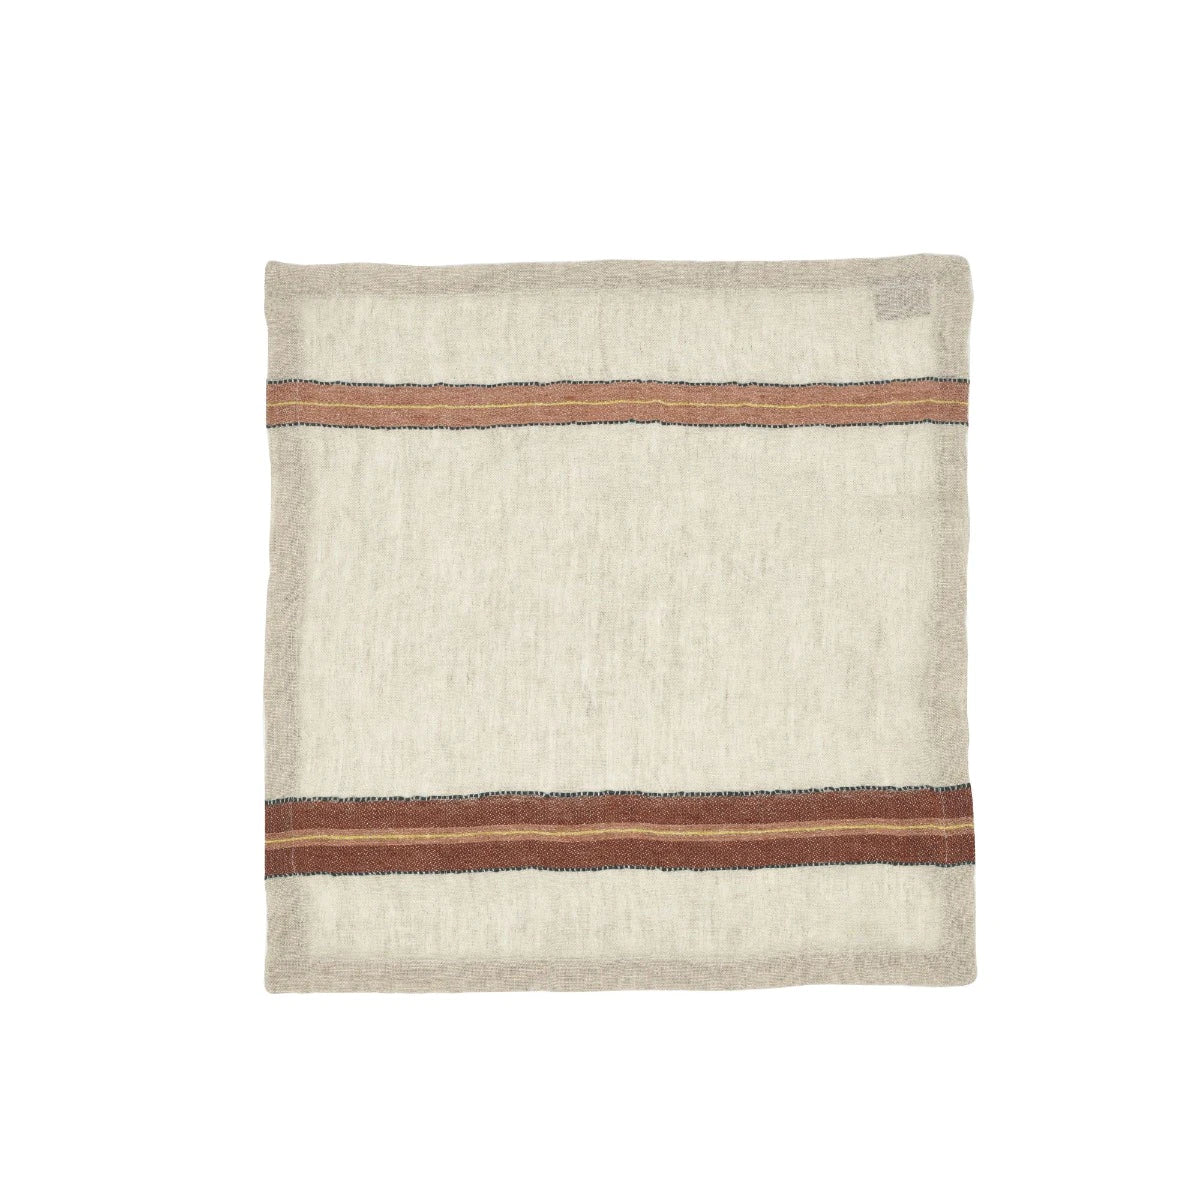 banks napkin belgian linen by libeco on adorn.house